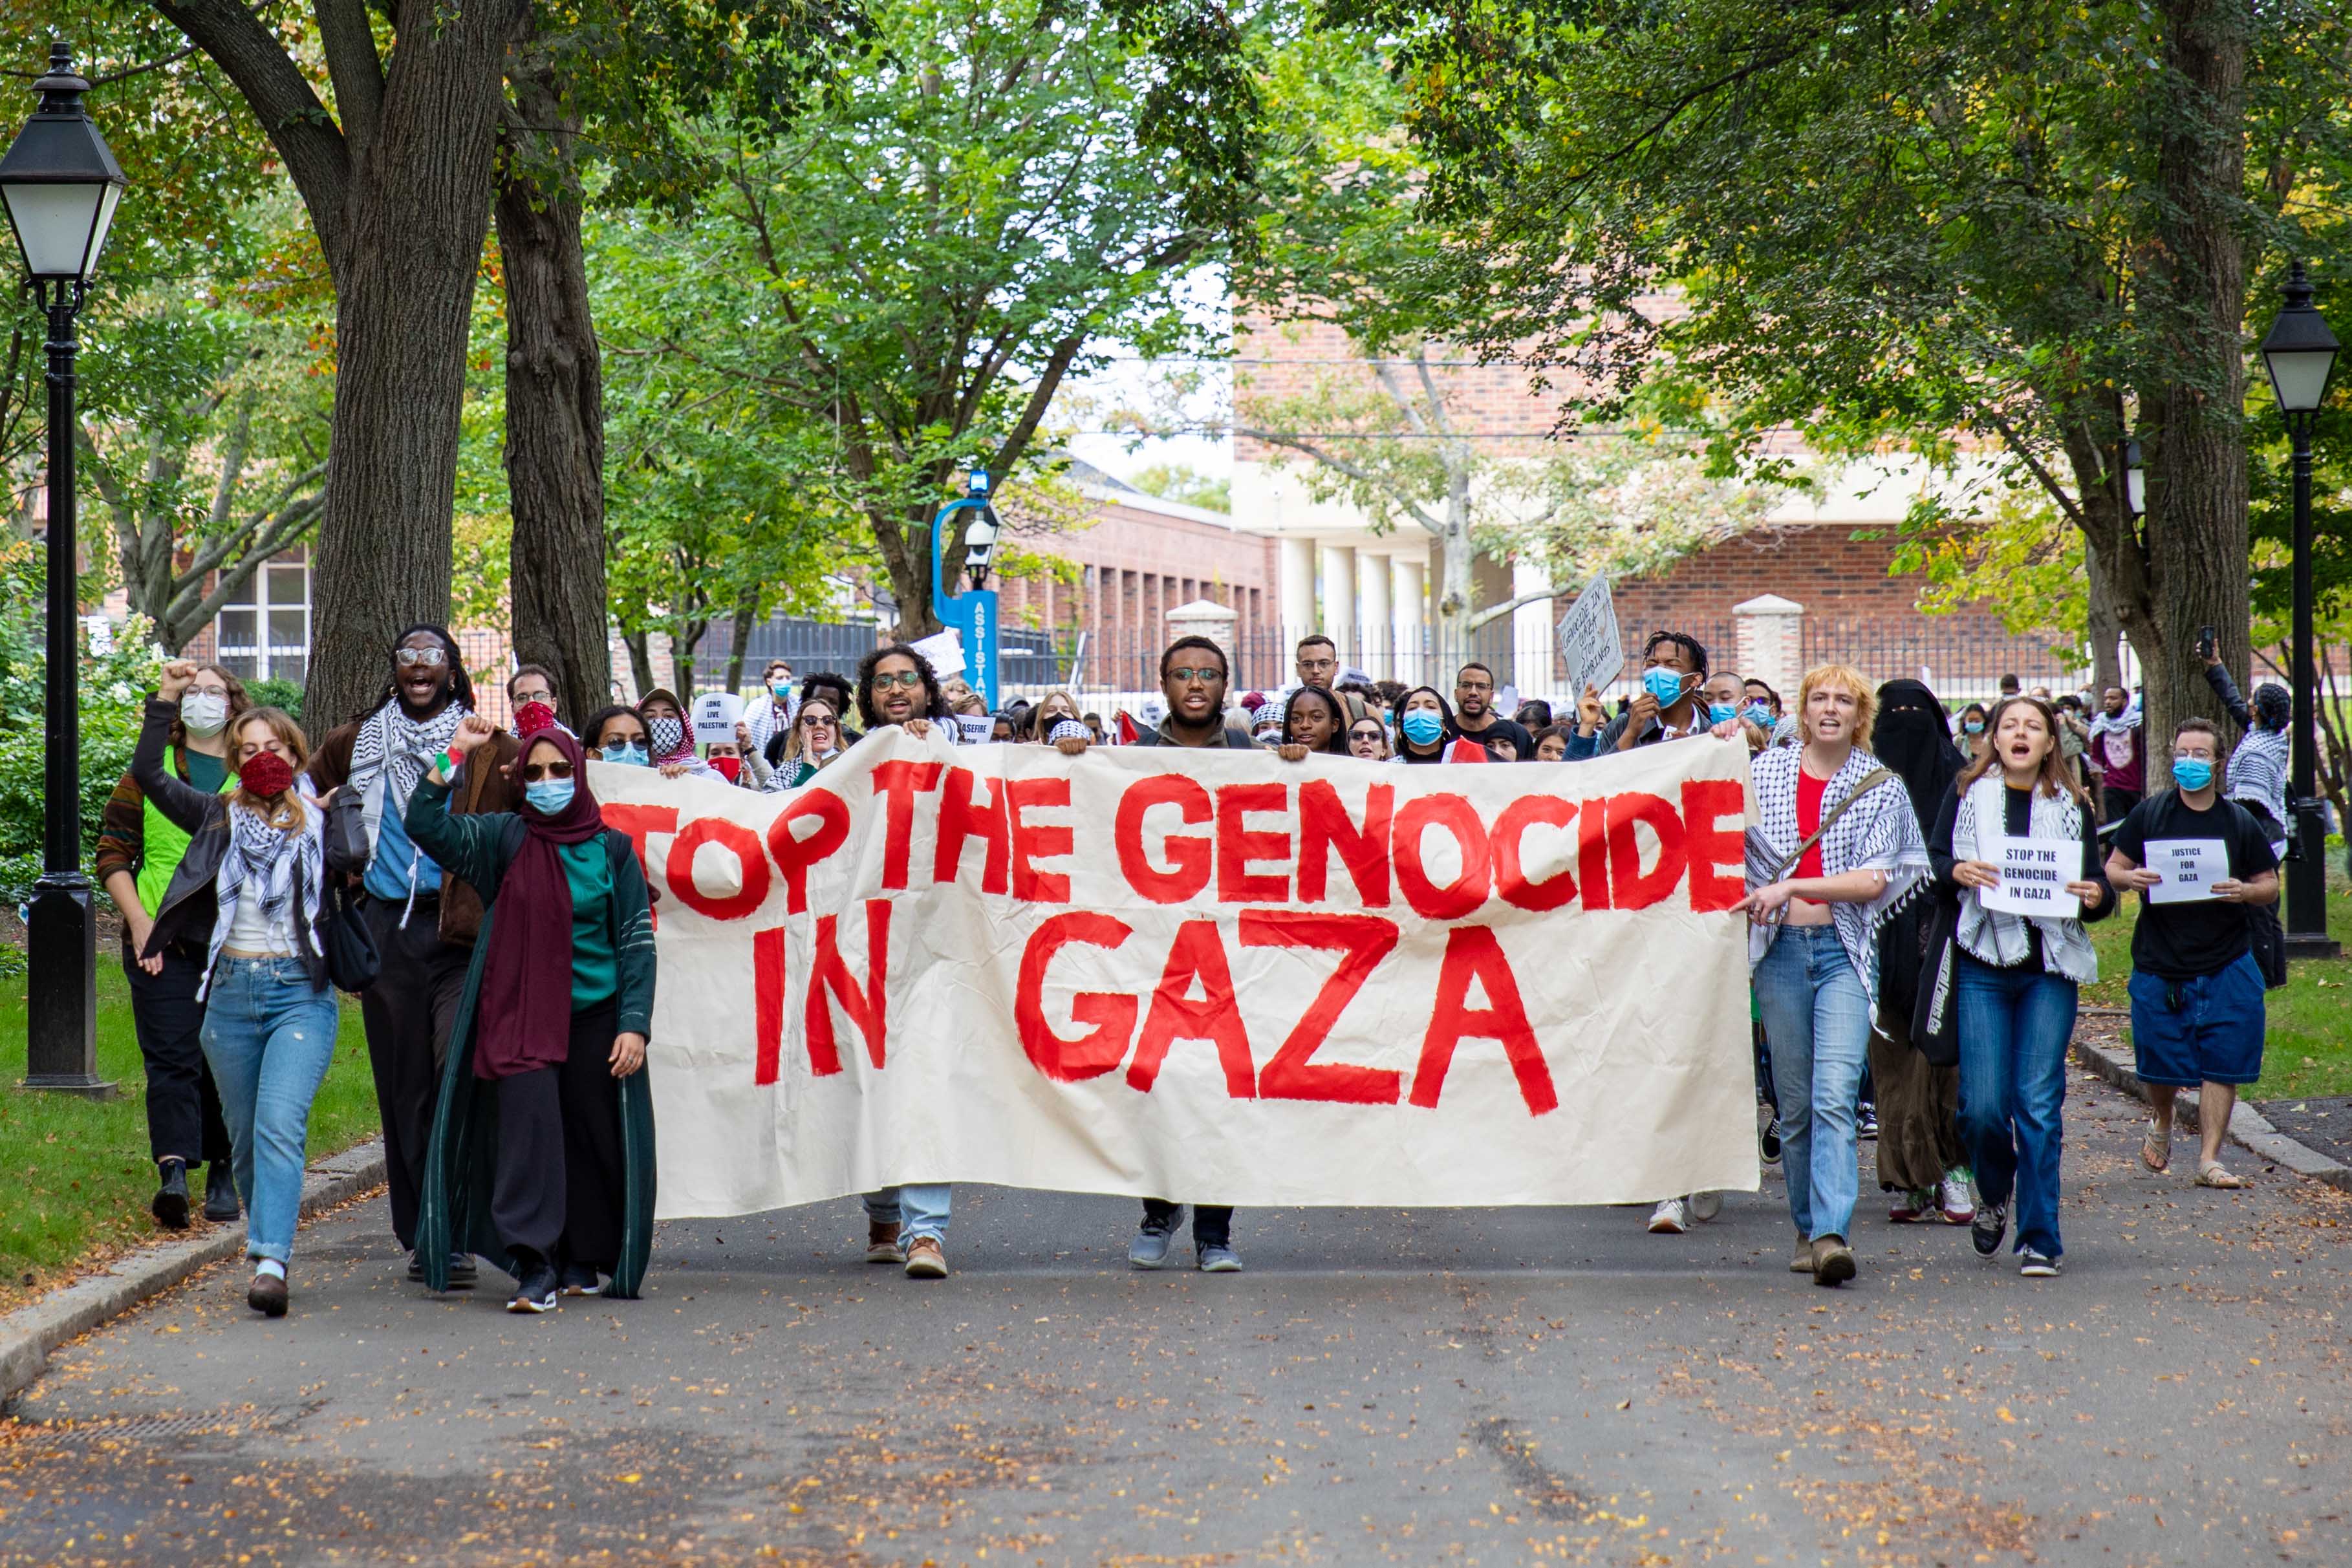 At the Business School, protesters hold up signs reading “Justice for Gaza,” “Ceasefire Now,” and “Hold Harvard Accountable For Supporting Genocide.”